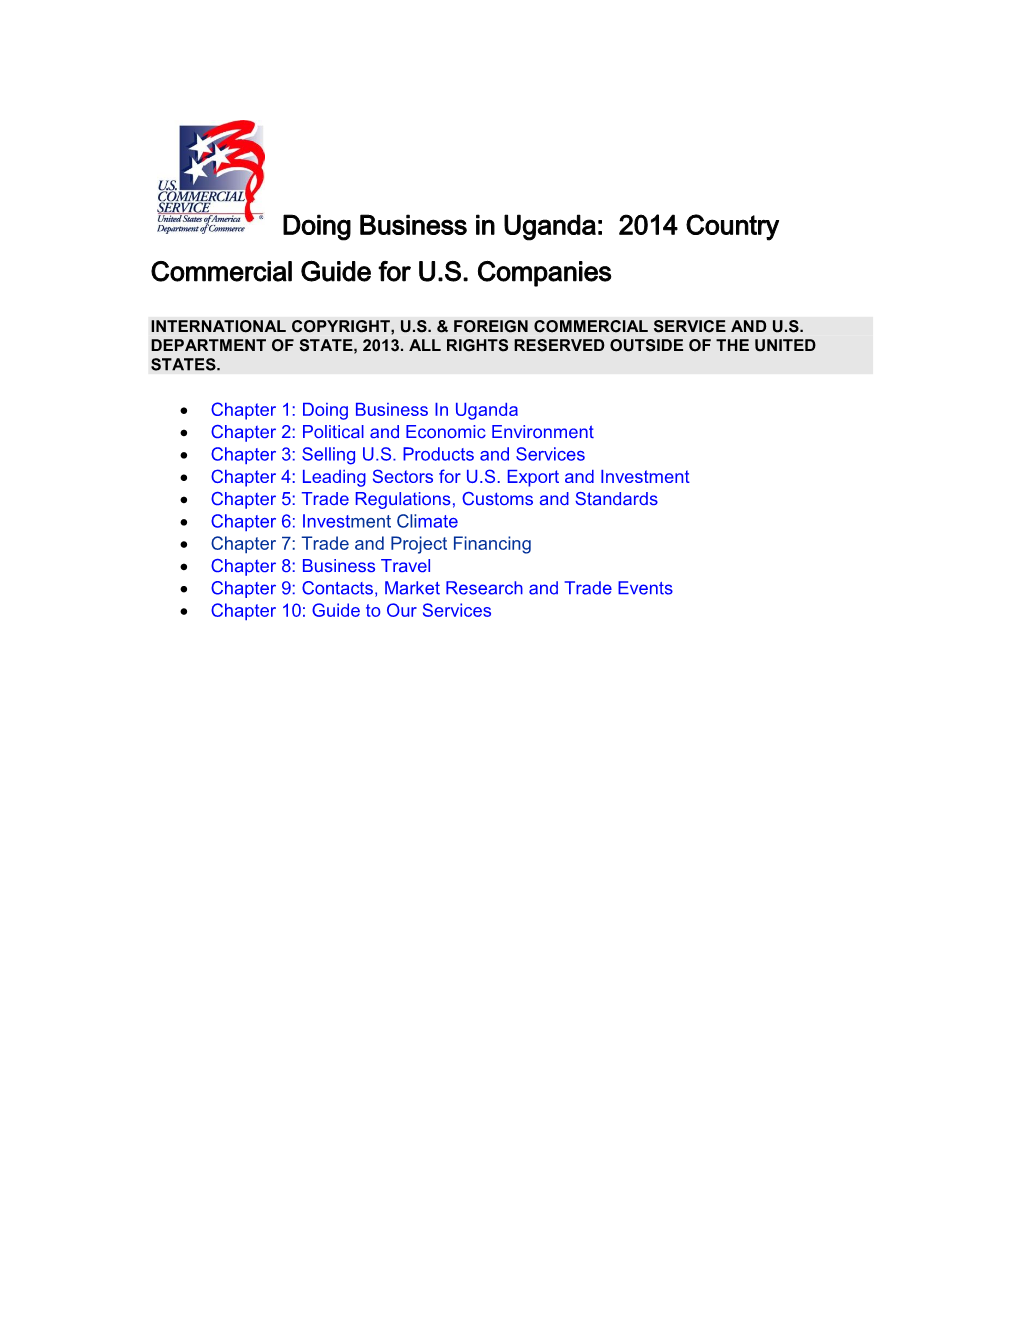 Doing Business in Uganda: 2014 Country Commercial Guide for U.S